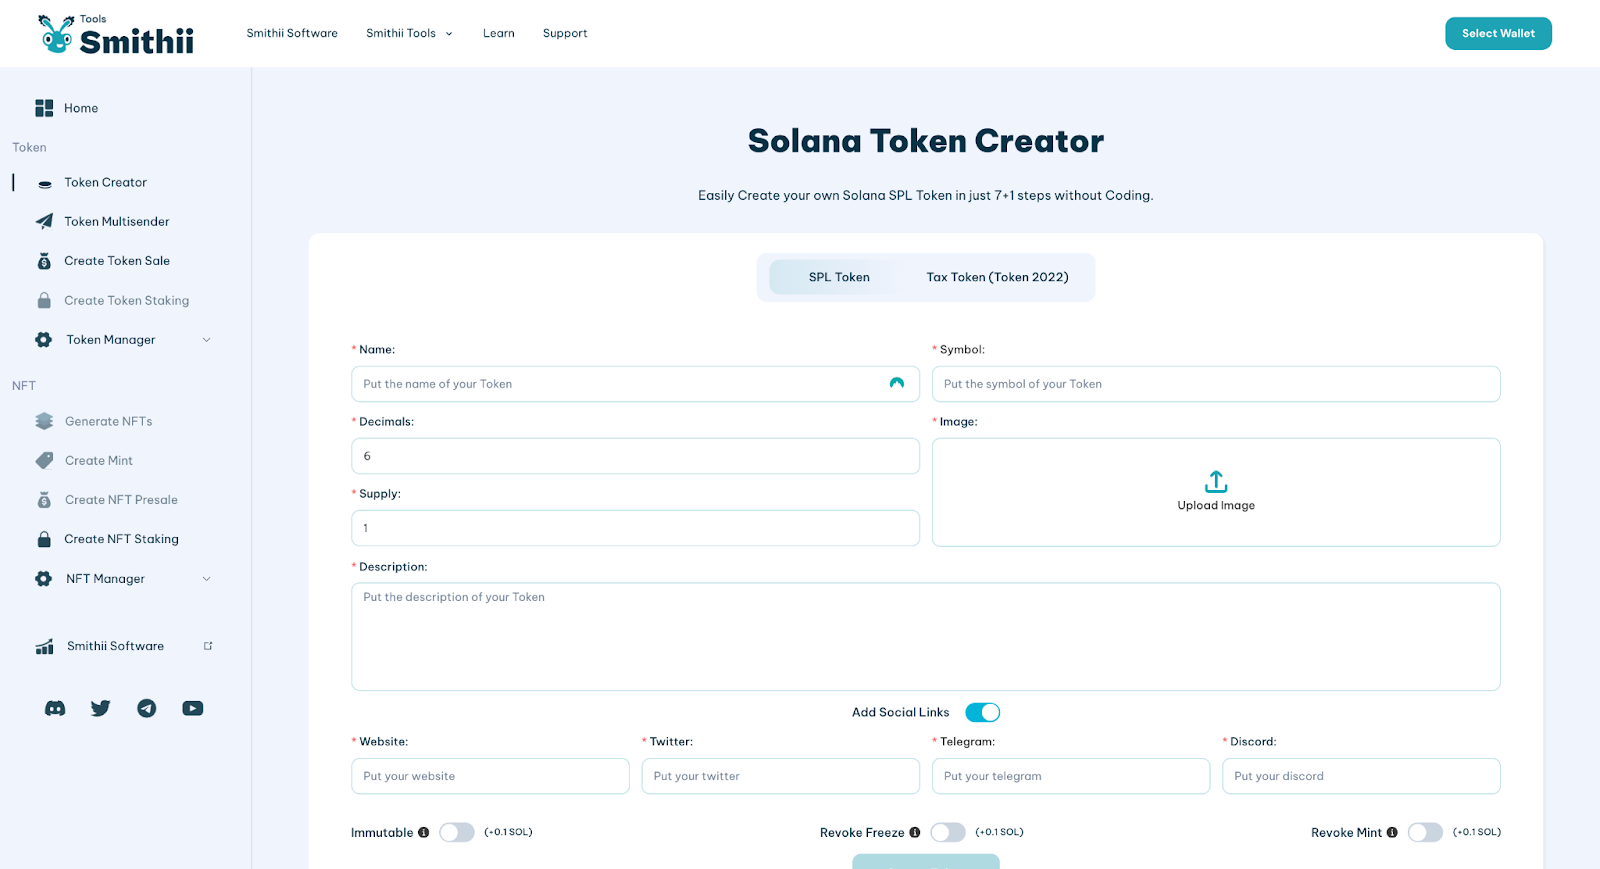  solana blockchain tokens token launch although may 